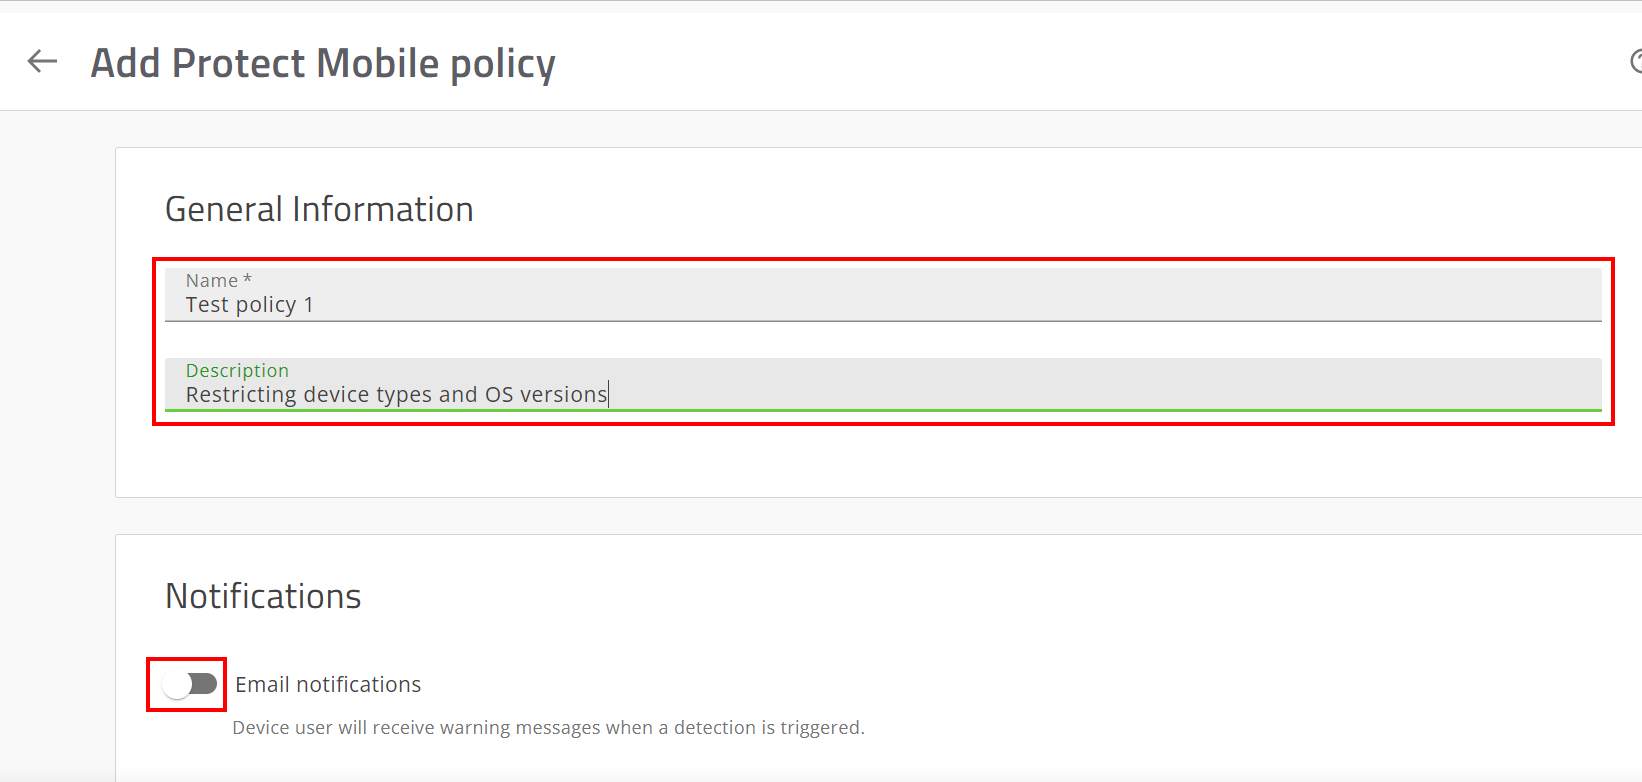 Name the Policy and set notification preferences